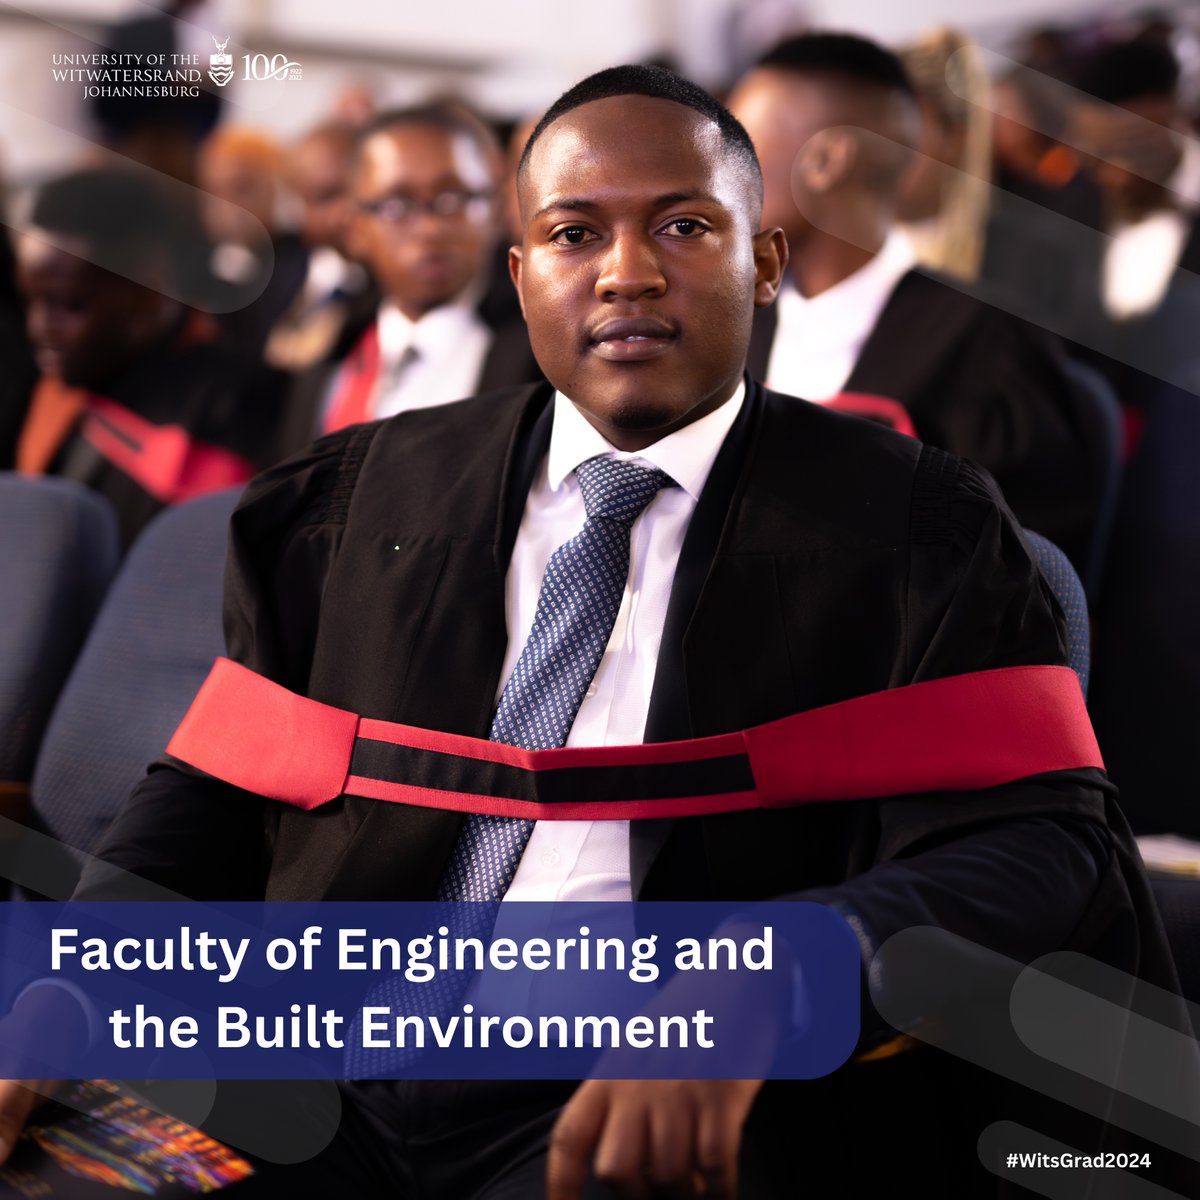 #WitsGrad2024 | DAY 7 🤩 Congratulations to all the graduands from the Faculty Engineering and the Built Environment who will be conferred today!🏛️🎓 Ceremonies for today: 09:30: youtu.be/sCgH231wgfI 13:30: youtu.be/QRKmKnIm44c #Witsie4Life #WitsGraduate